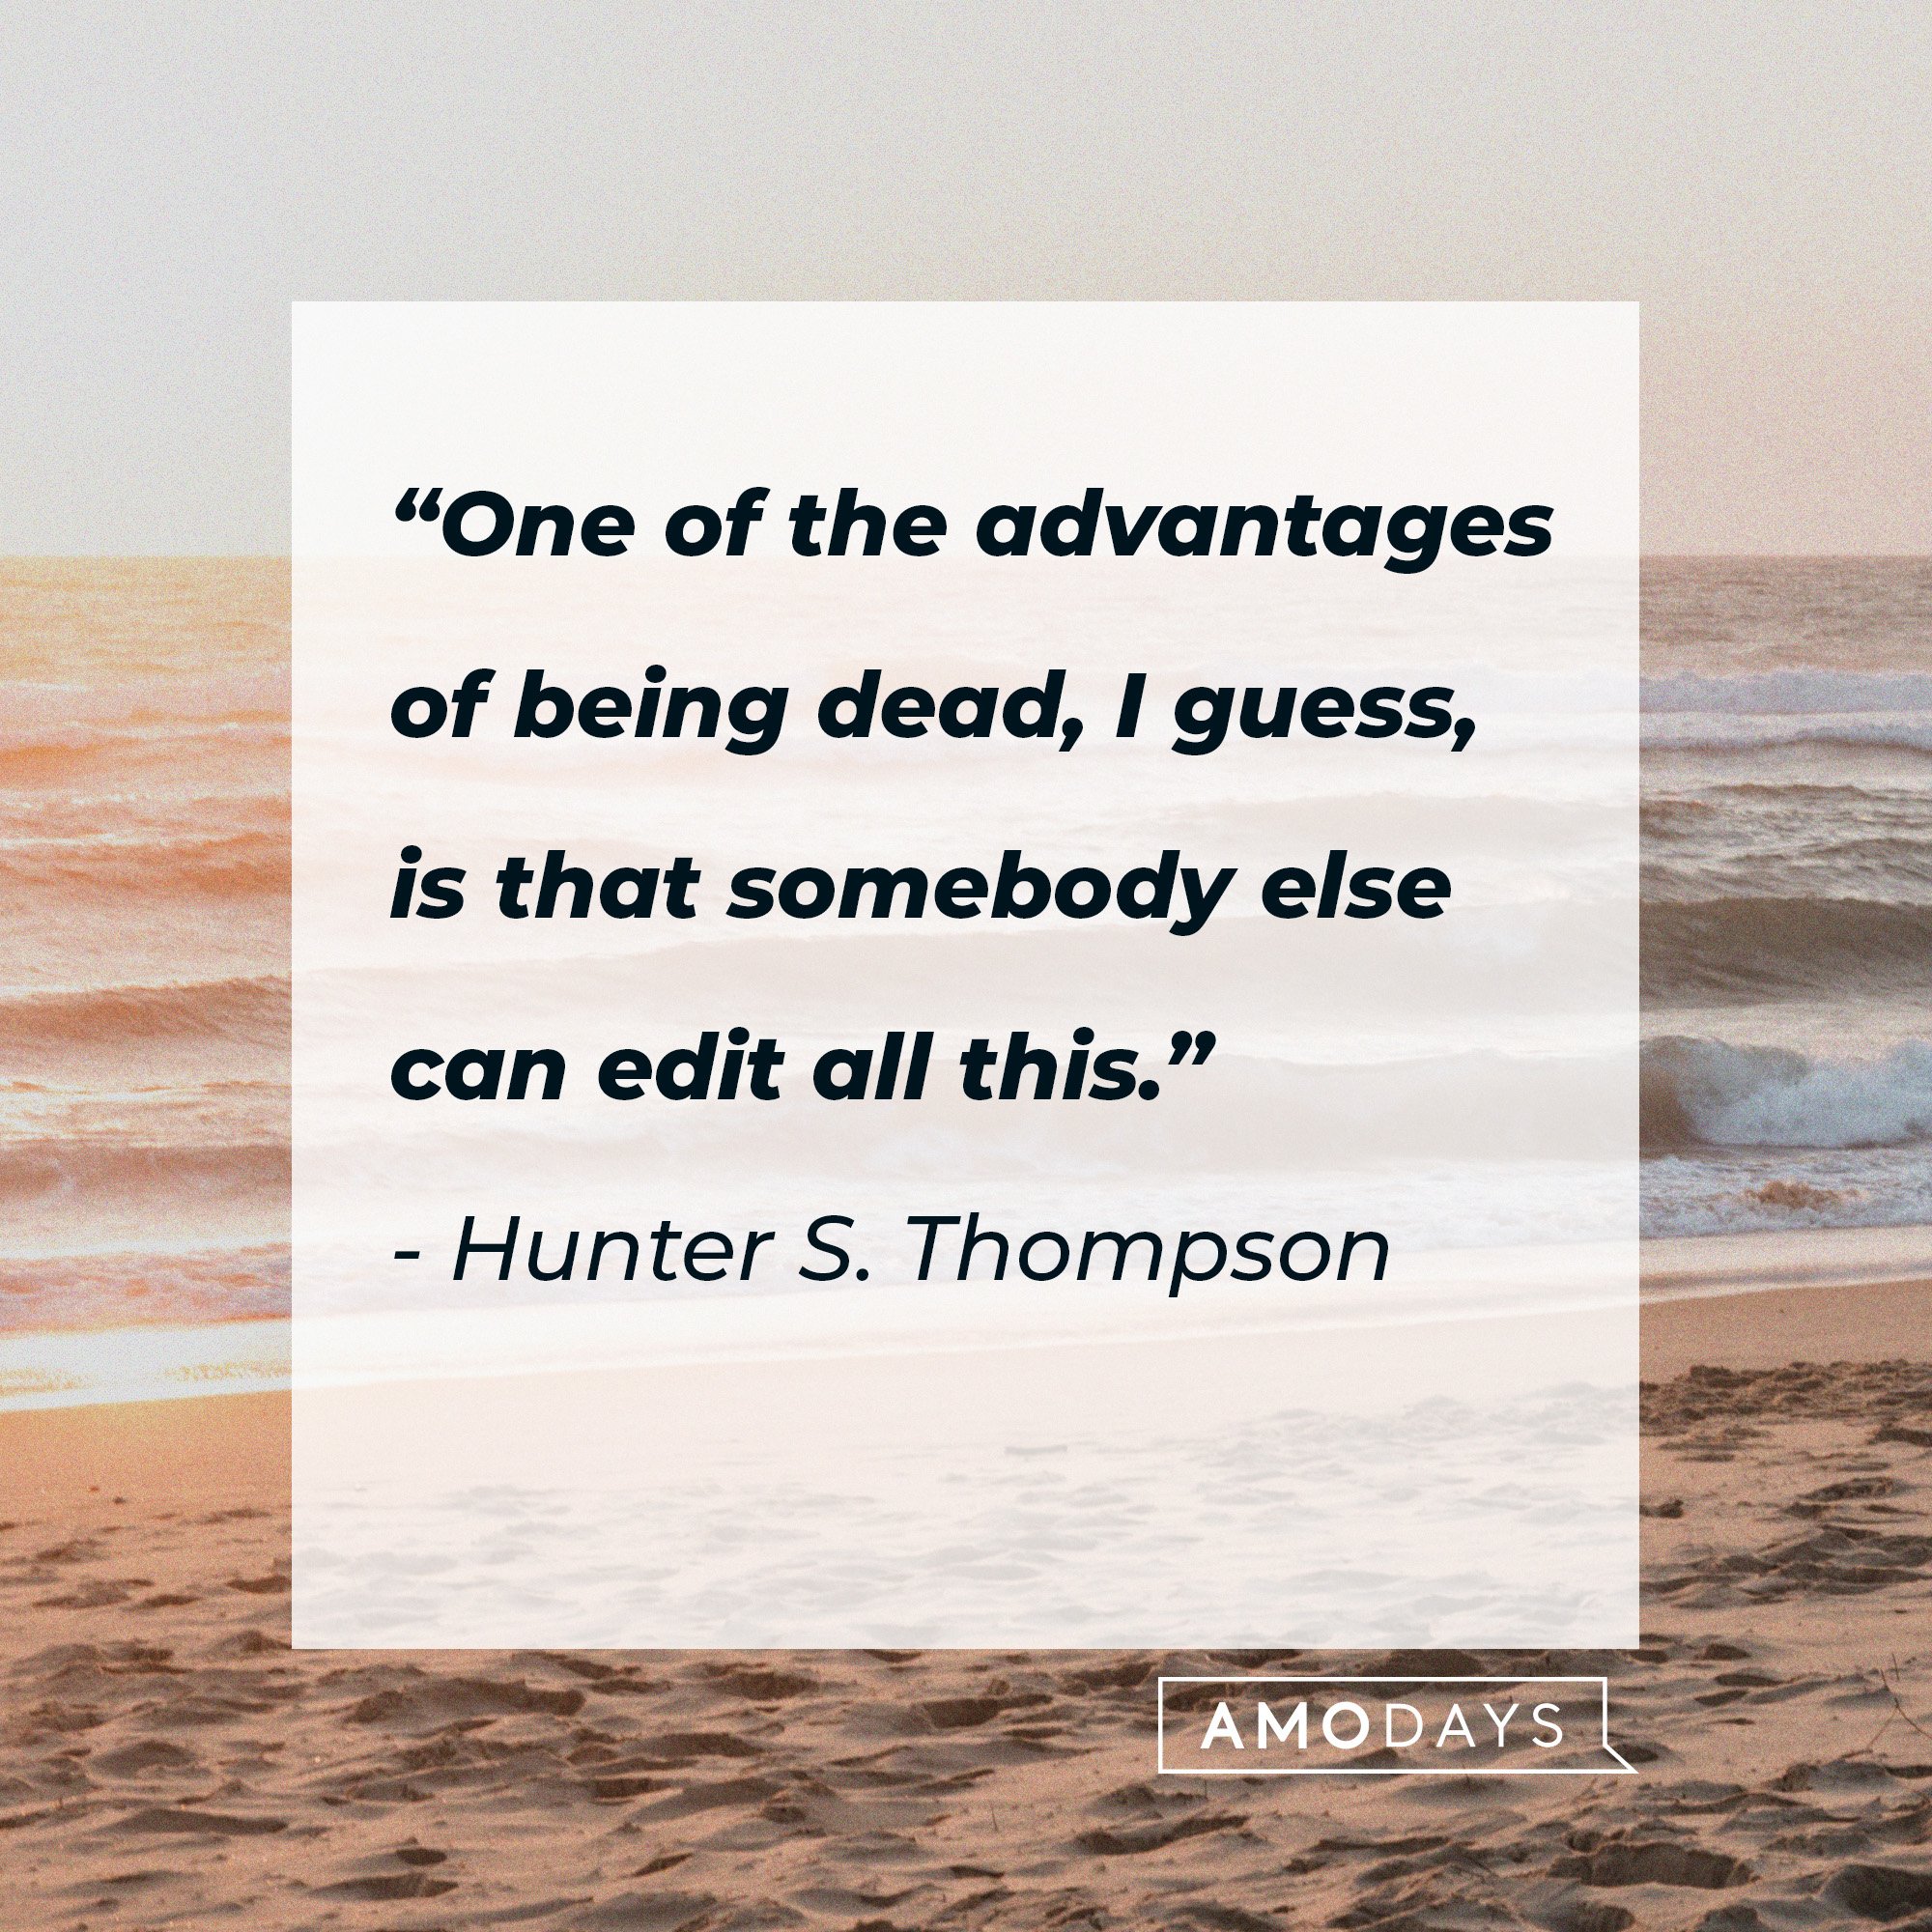 Hunter S. Thompson’s quote: “One of the advantages of being dead, I guess, is that somebody else can edit all this.”  | Image: AmoDays